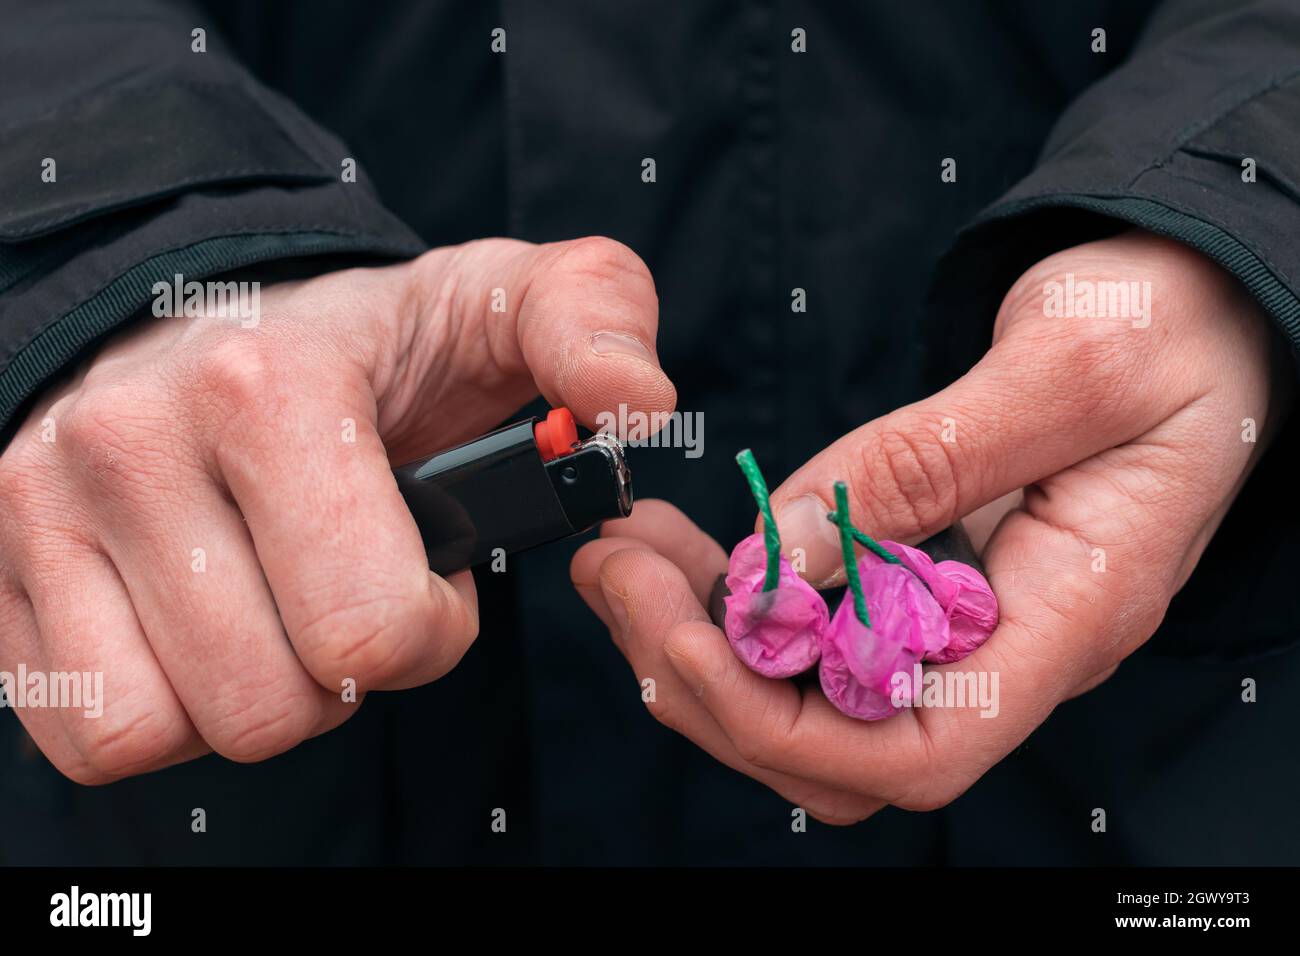 Midsection Of Person Holding Lighter And Bomb Stock Photo - Alamy